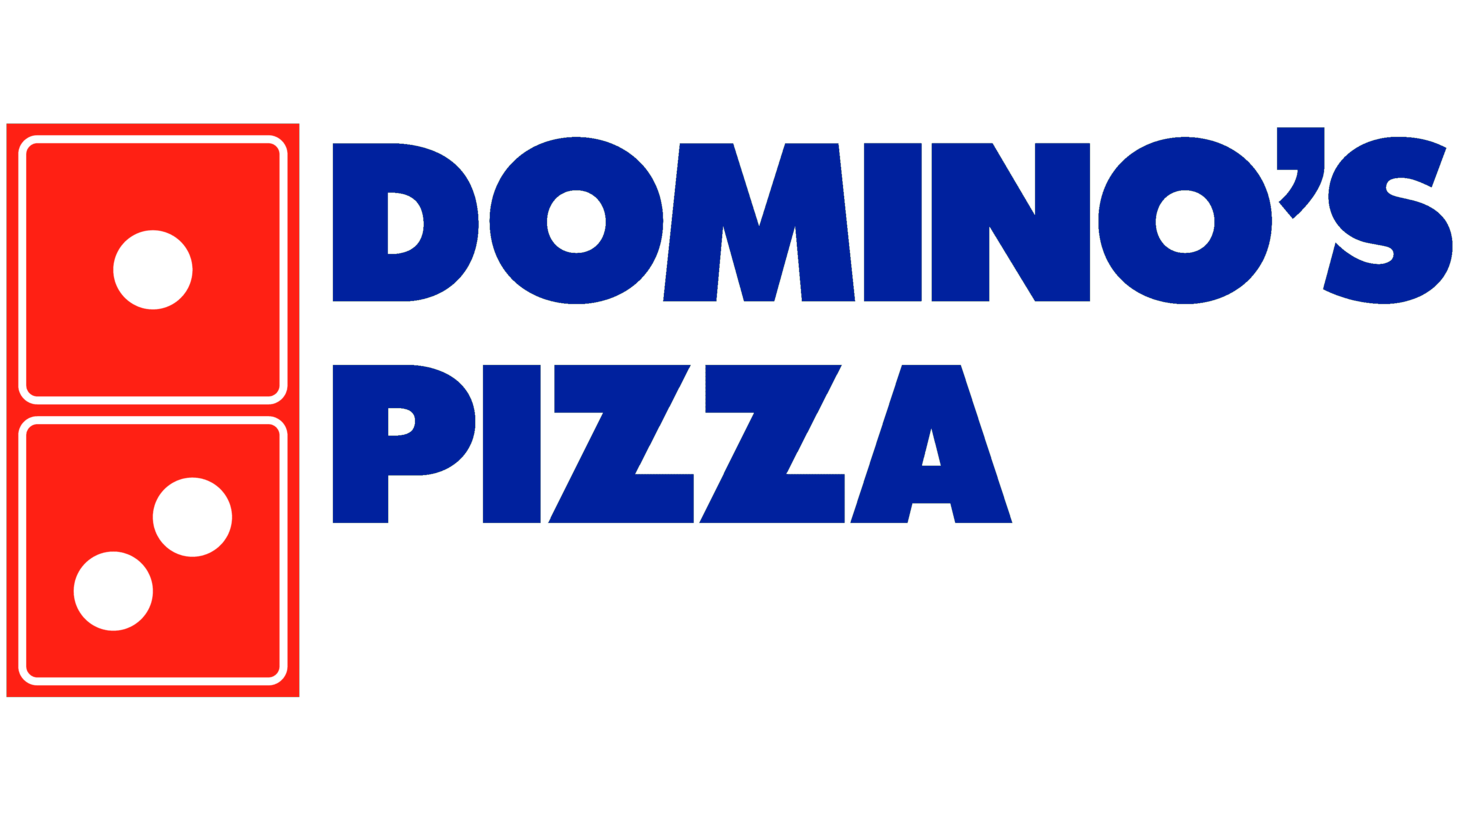 Dominos pizza sign 1969 1975